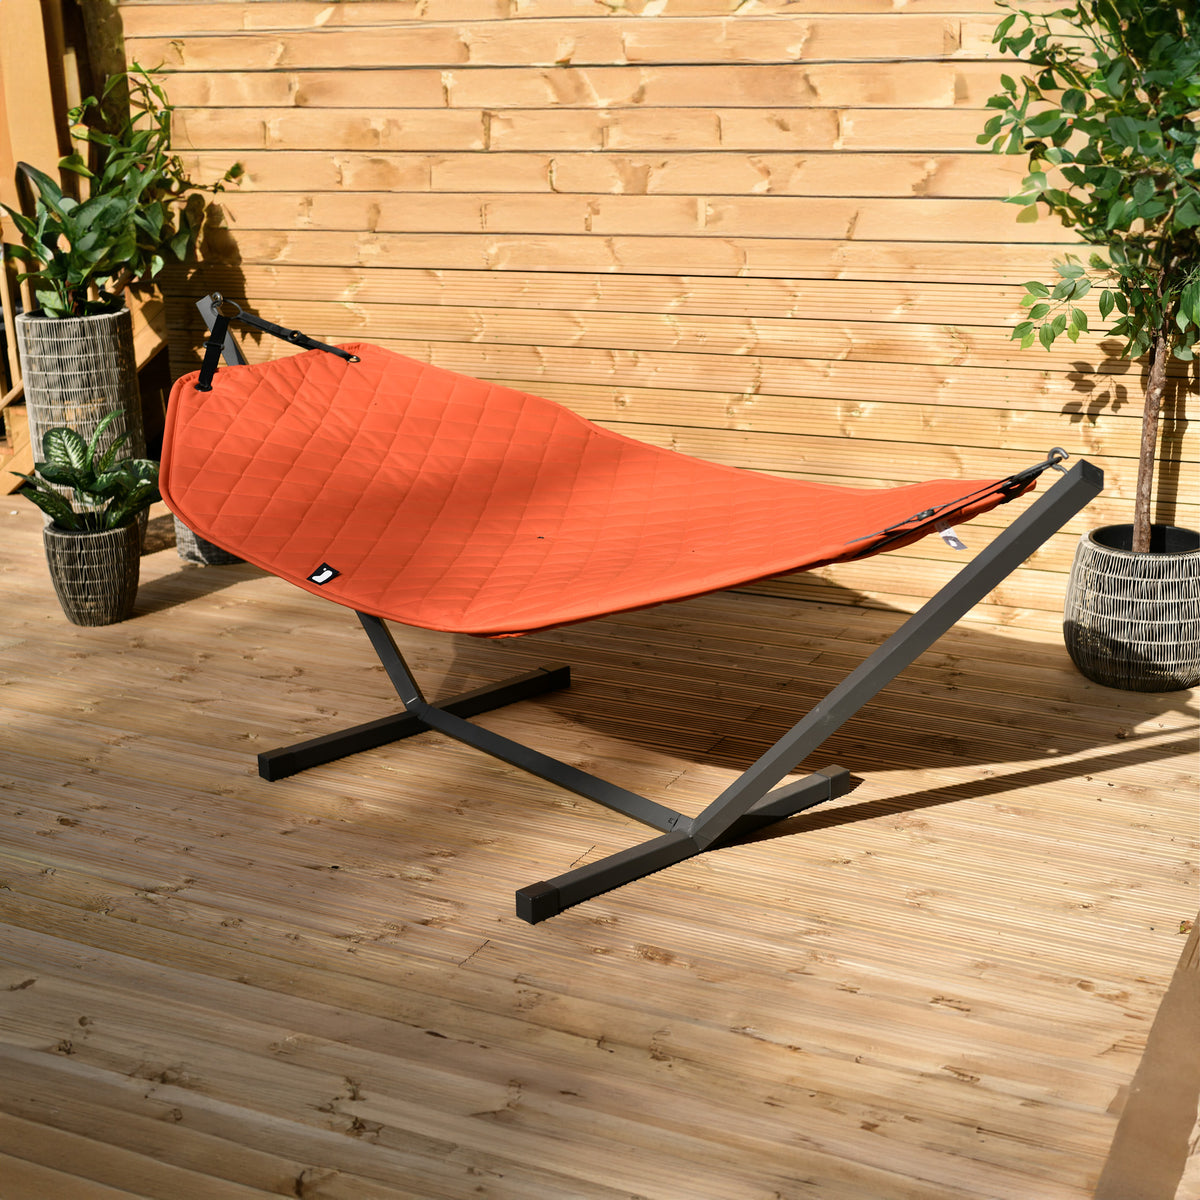 Extreme Lounging Orange B Hammock with Cushion for outdoor patio